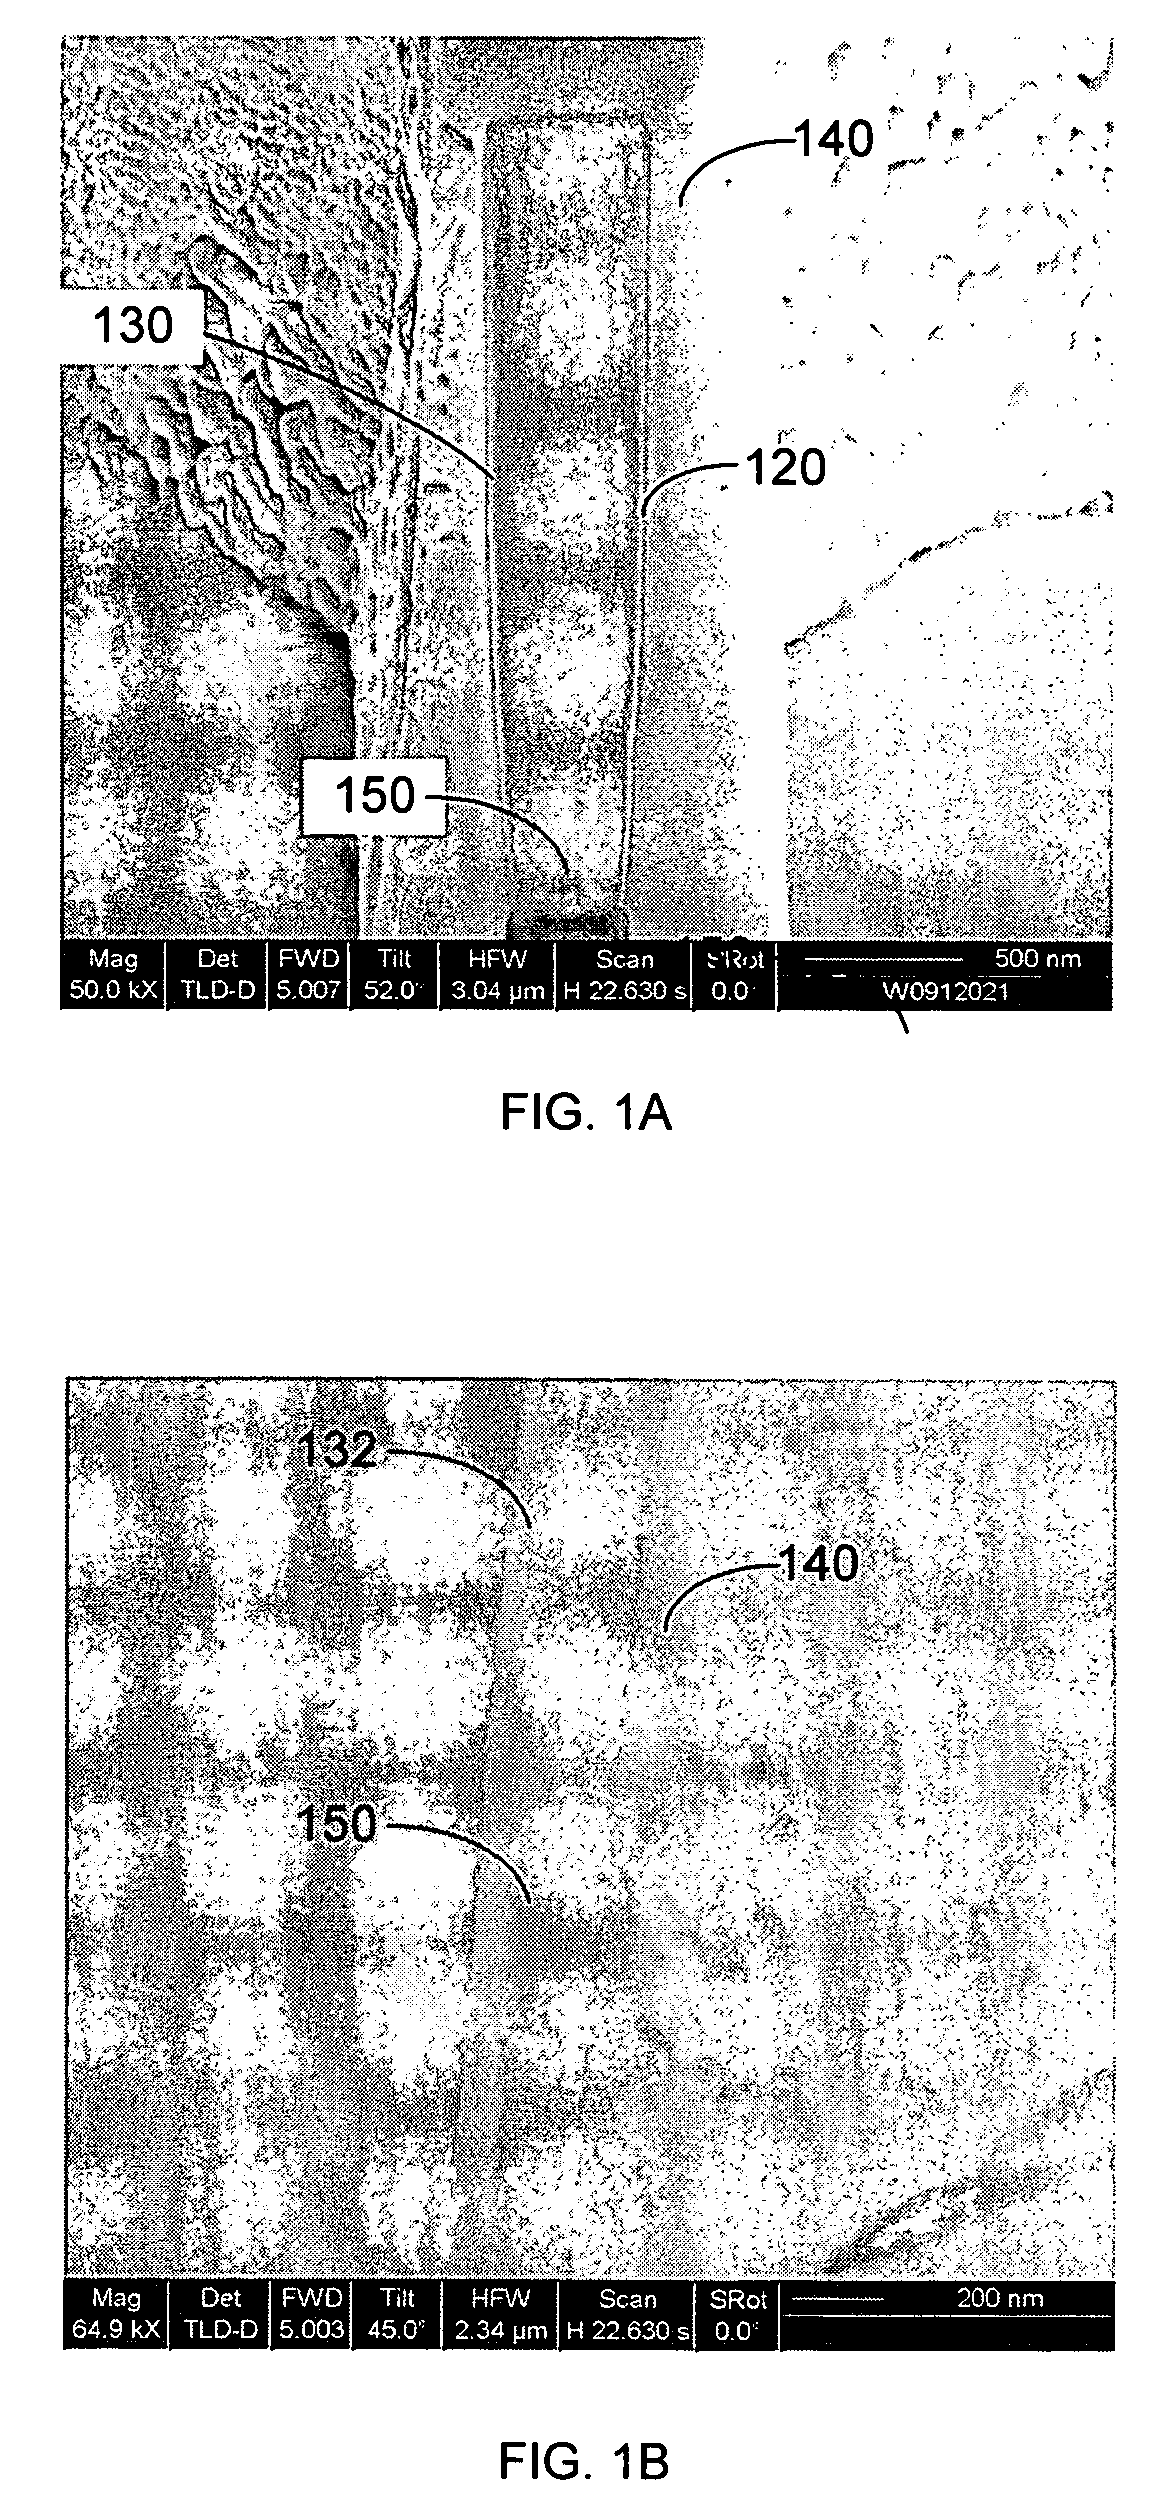 Method and apparatus for controlling topological variation on a milled cross-section of a structure